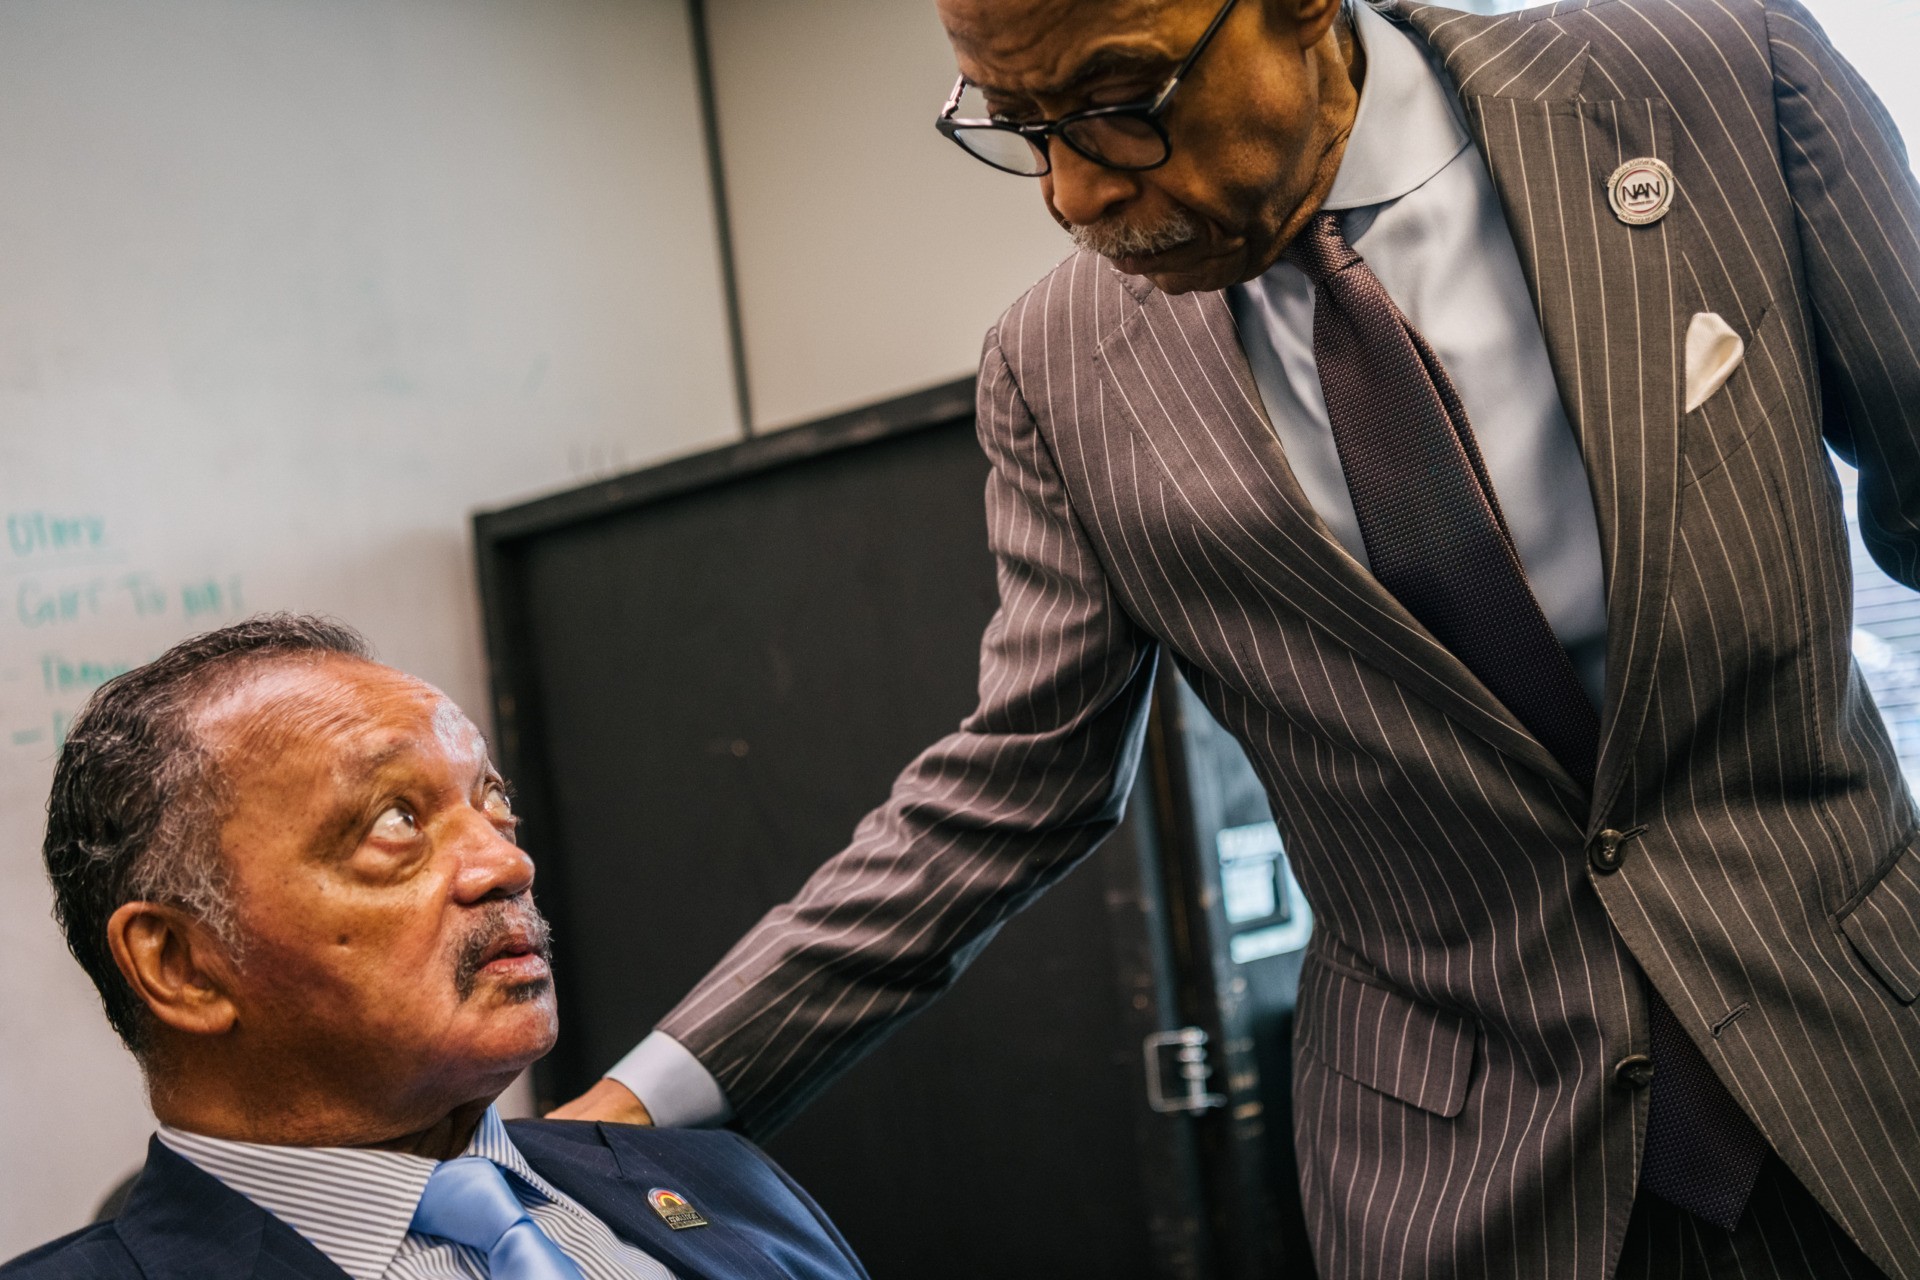 TULSA, OKLAHOMA - JUNE 01: (L-R) Civil Rights leaders Jesse Jackson and Rev. Al Sharpton spend time together ahead of a rally during commemorations of the 100th anniversary of the Tulsa Race Massacre on June 01, 2021 in Tulsa, Oklahoma. President Biden stopped in Tulsa to commemorate the centennial of the Tulsa Race Massacre. May 31st of this year marks the centennial of when a white mob started looting, burning and murdering in Tulsa's Greenwood neighborhood, then known as Black Wall Street, killing up to 300 people and displacing thousands more. Organizations and communities around Tulsa continue to honor and commemorate survivors and community residents. (Photo by Brandon Bell/Getty Images)